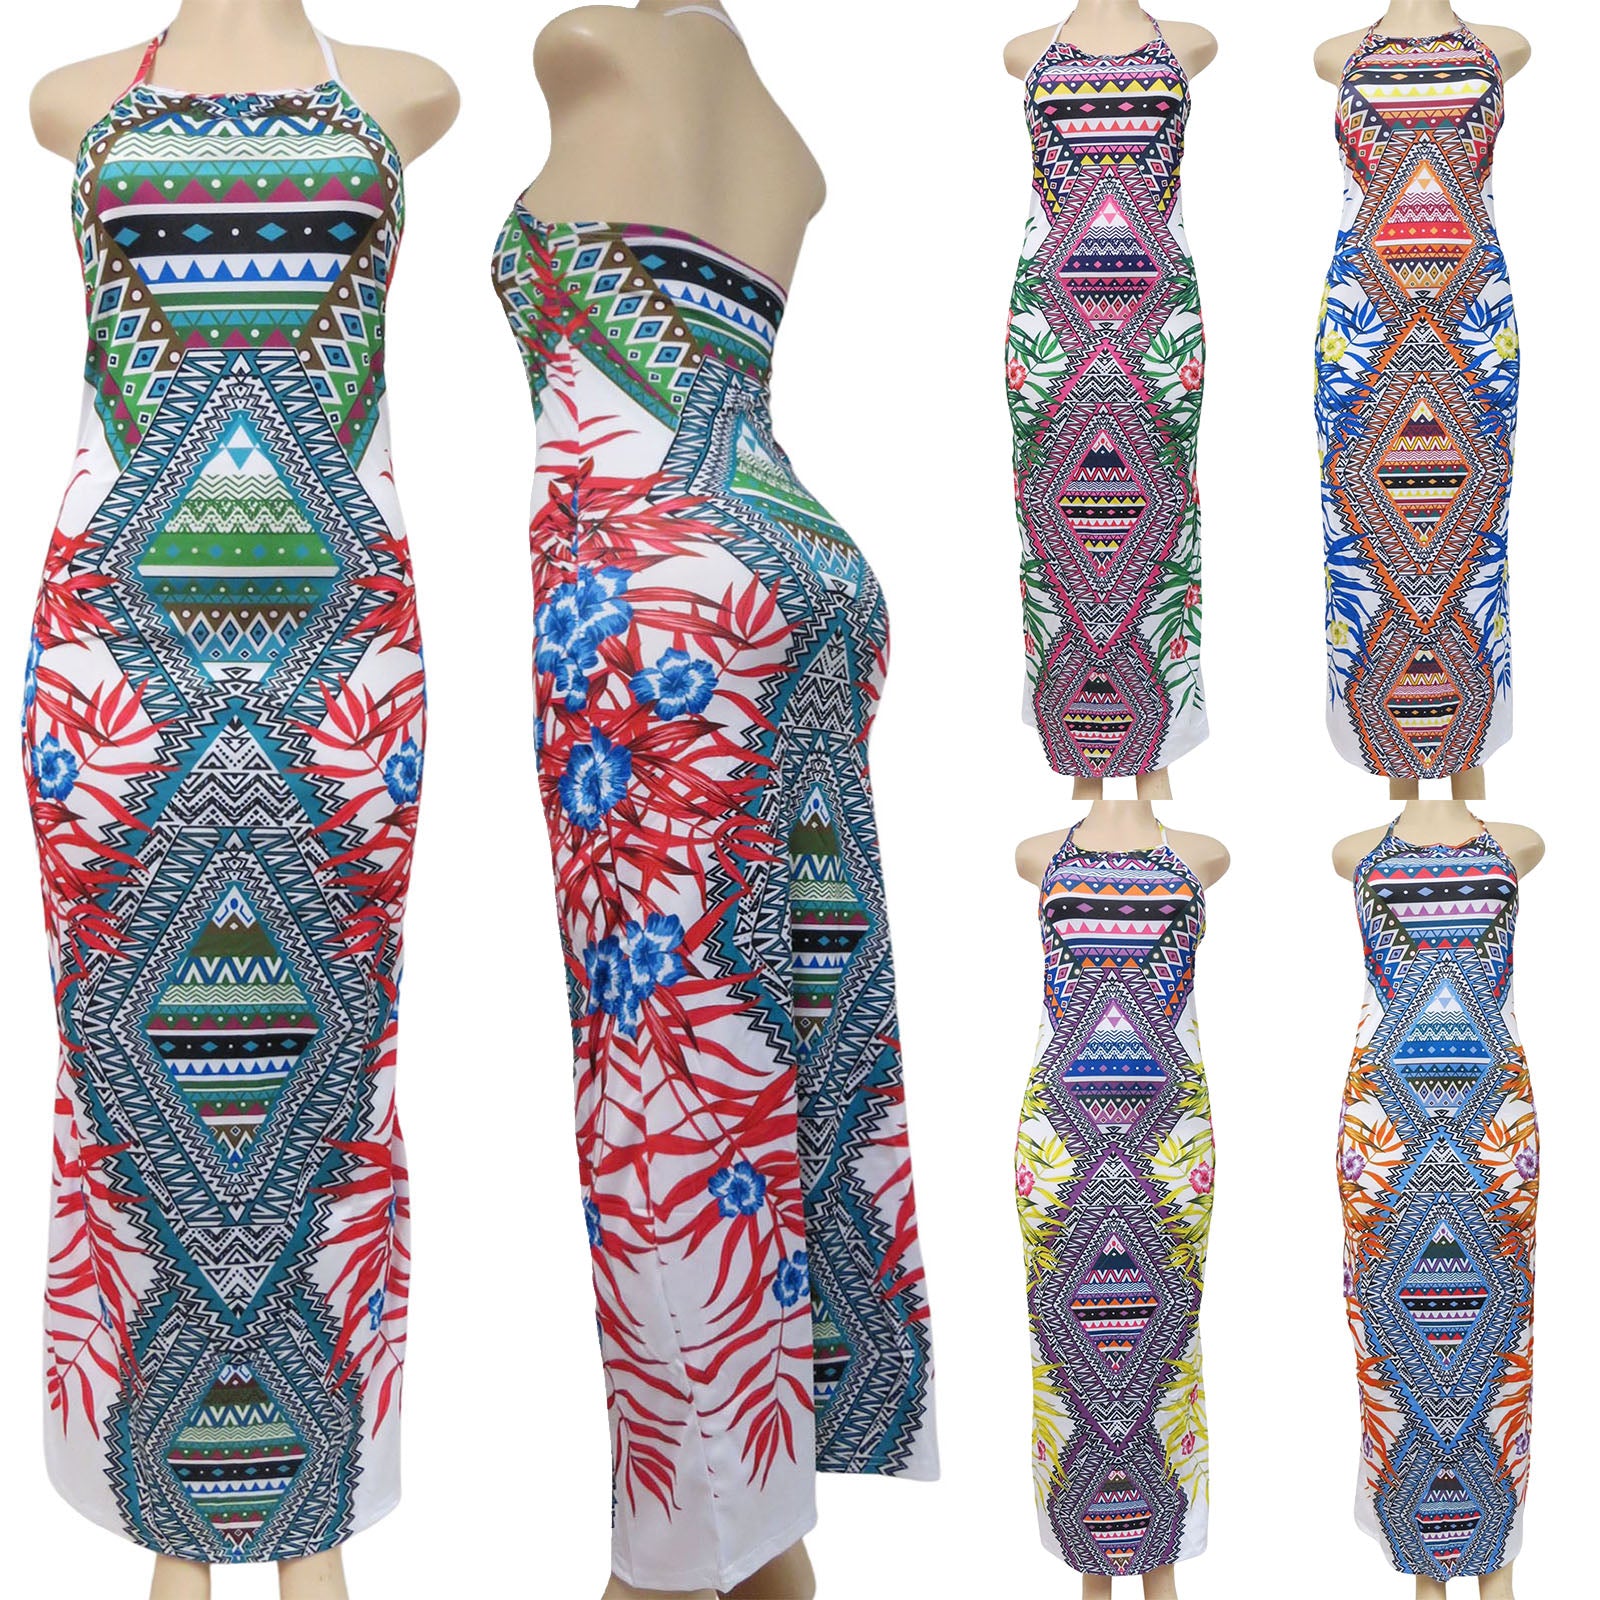 wholesale-tribal-southwestern-patterned-sleeveless-dresses-assorted-colors